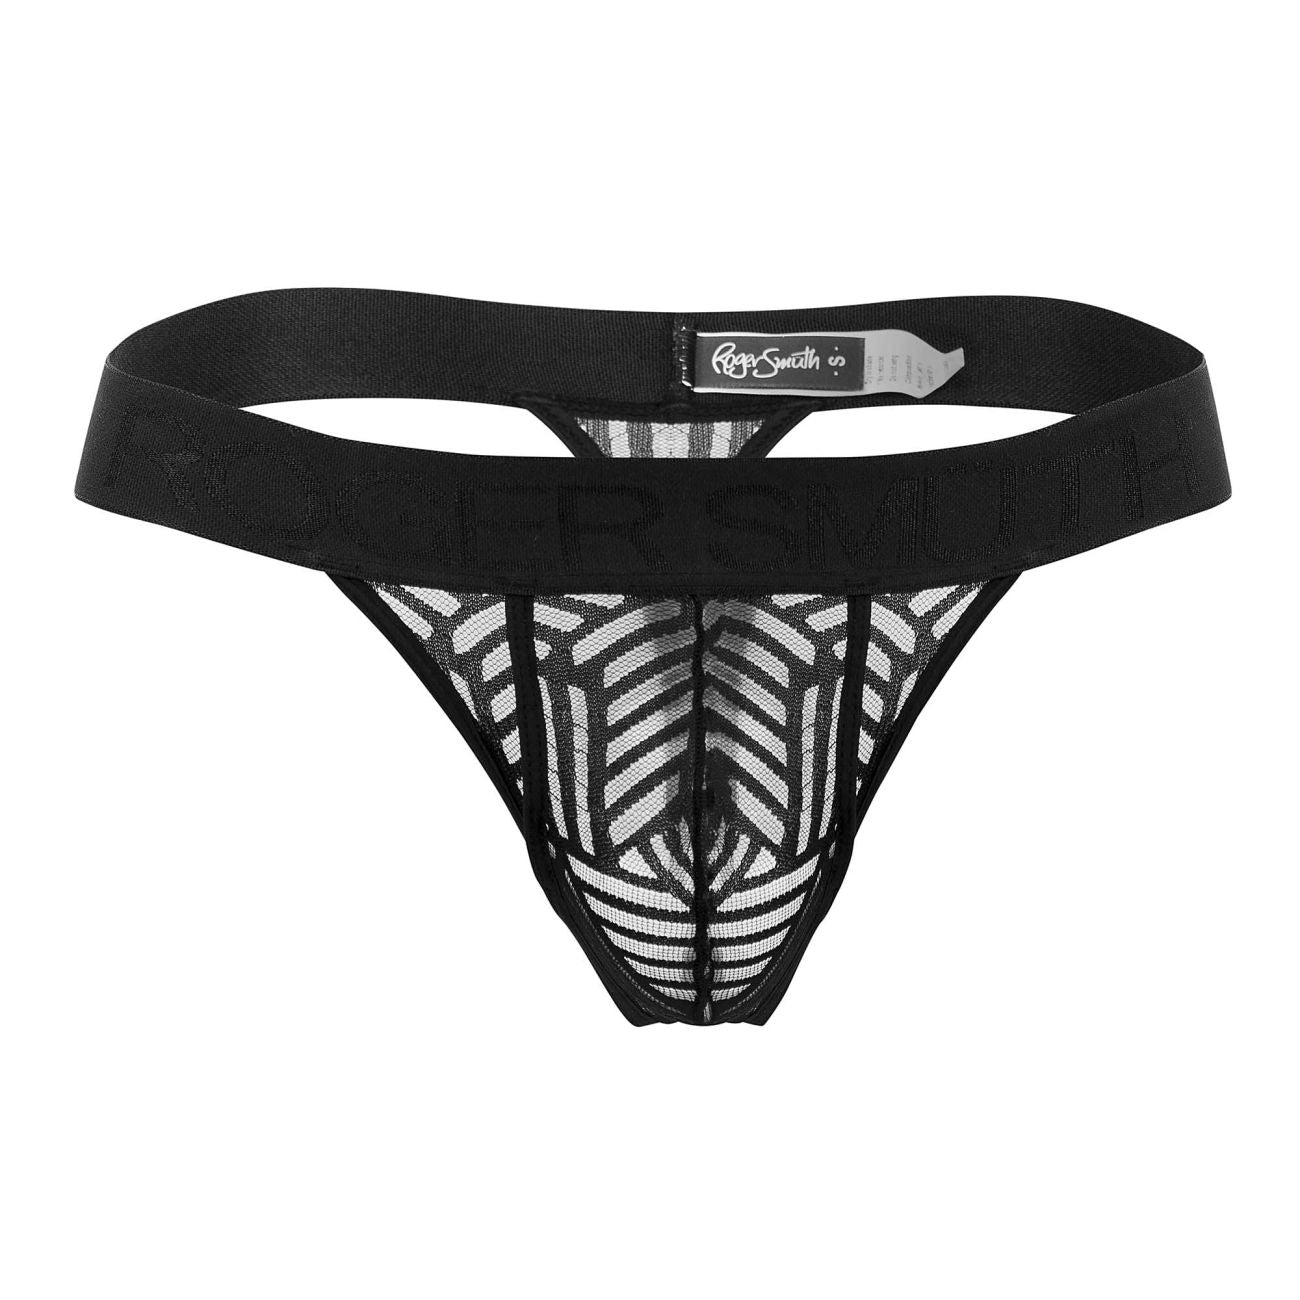 Roger Smuth RS065 Thong Black